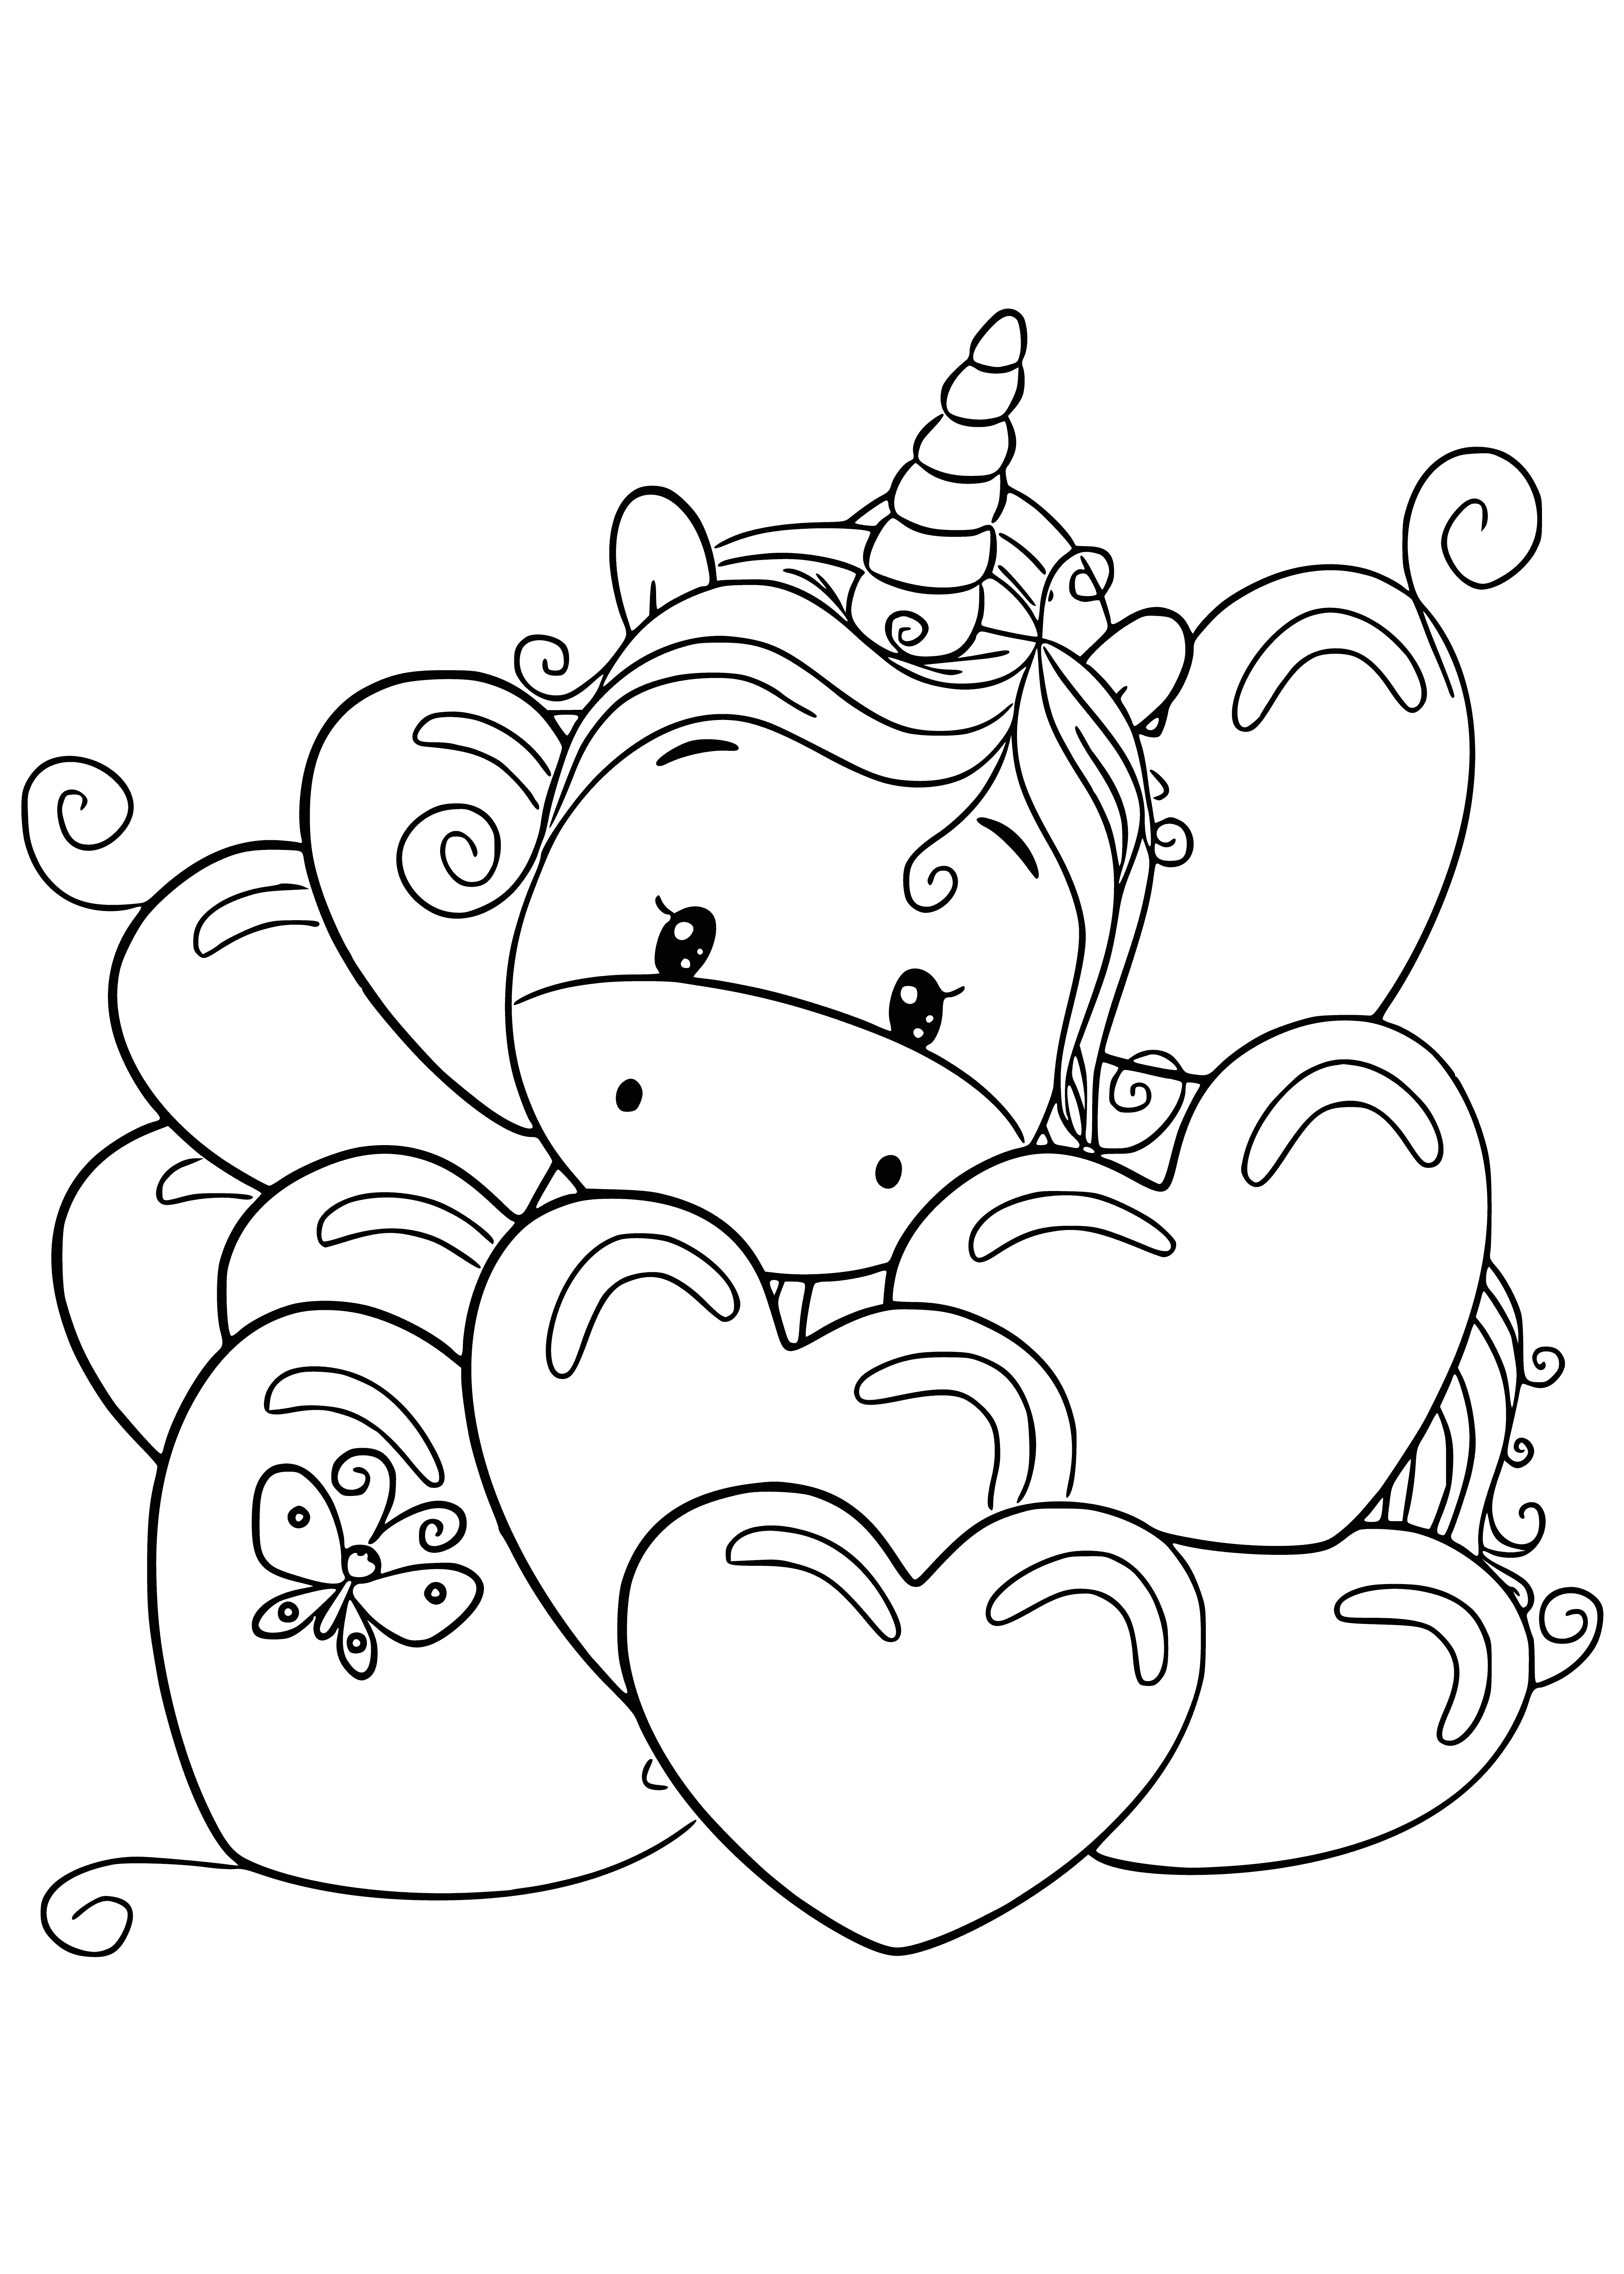 coloring page: Unicorn in love surrounded by Hearts, with one Heart on its forehead. #Kawaii #coloring